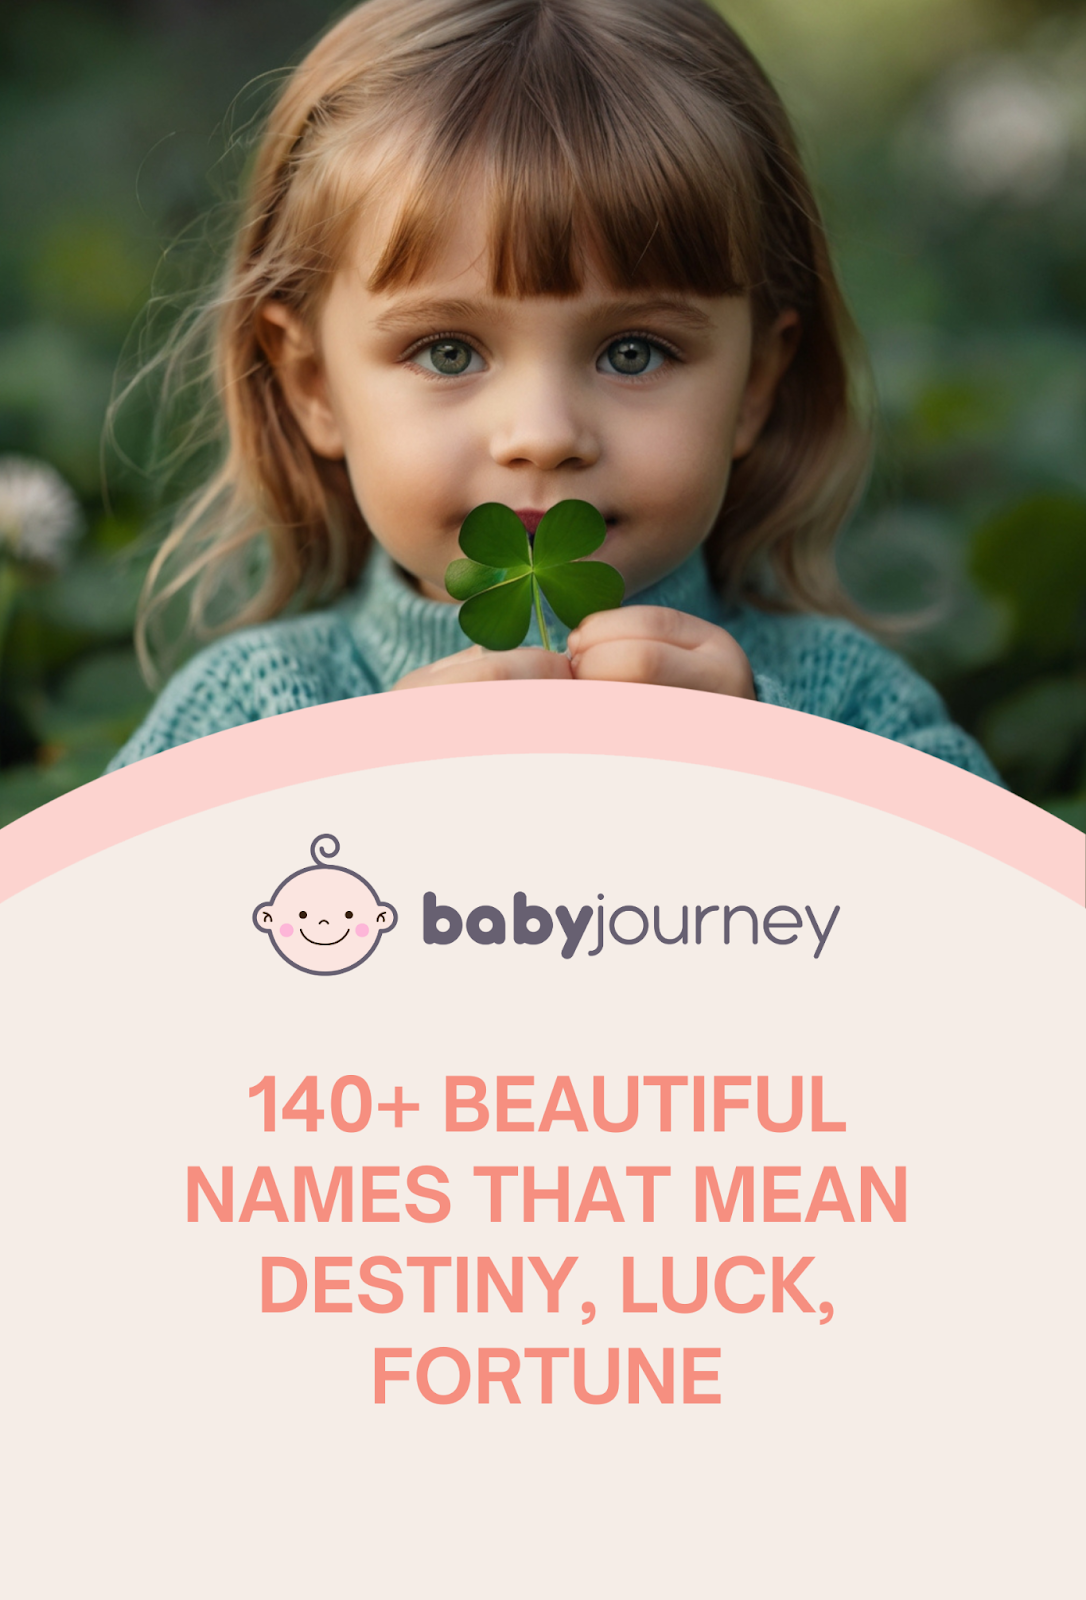 140+ Beautiful Names That Mean Destiny, Luck, Fortune - Names That Mean Destiny - Baby Journey
